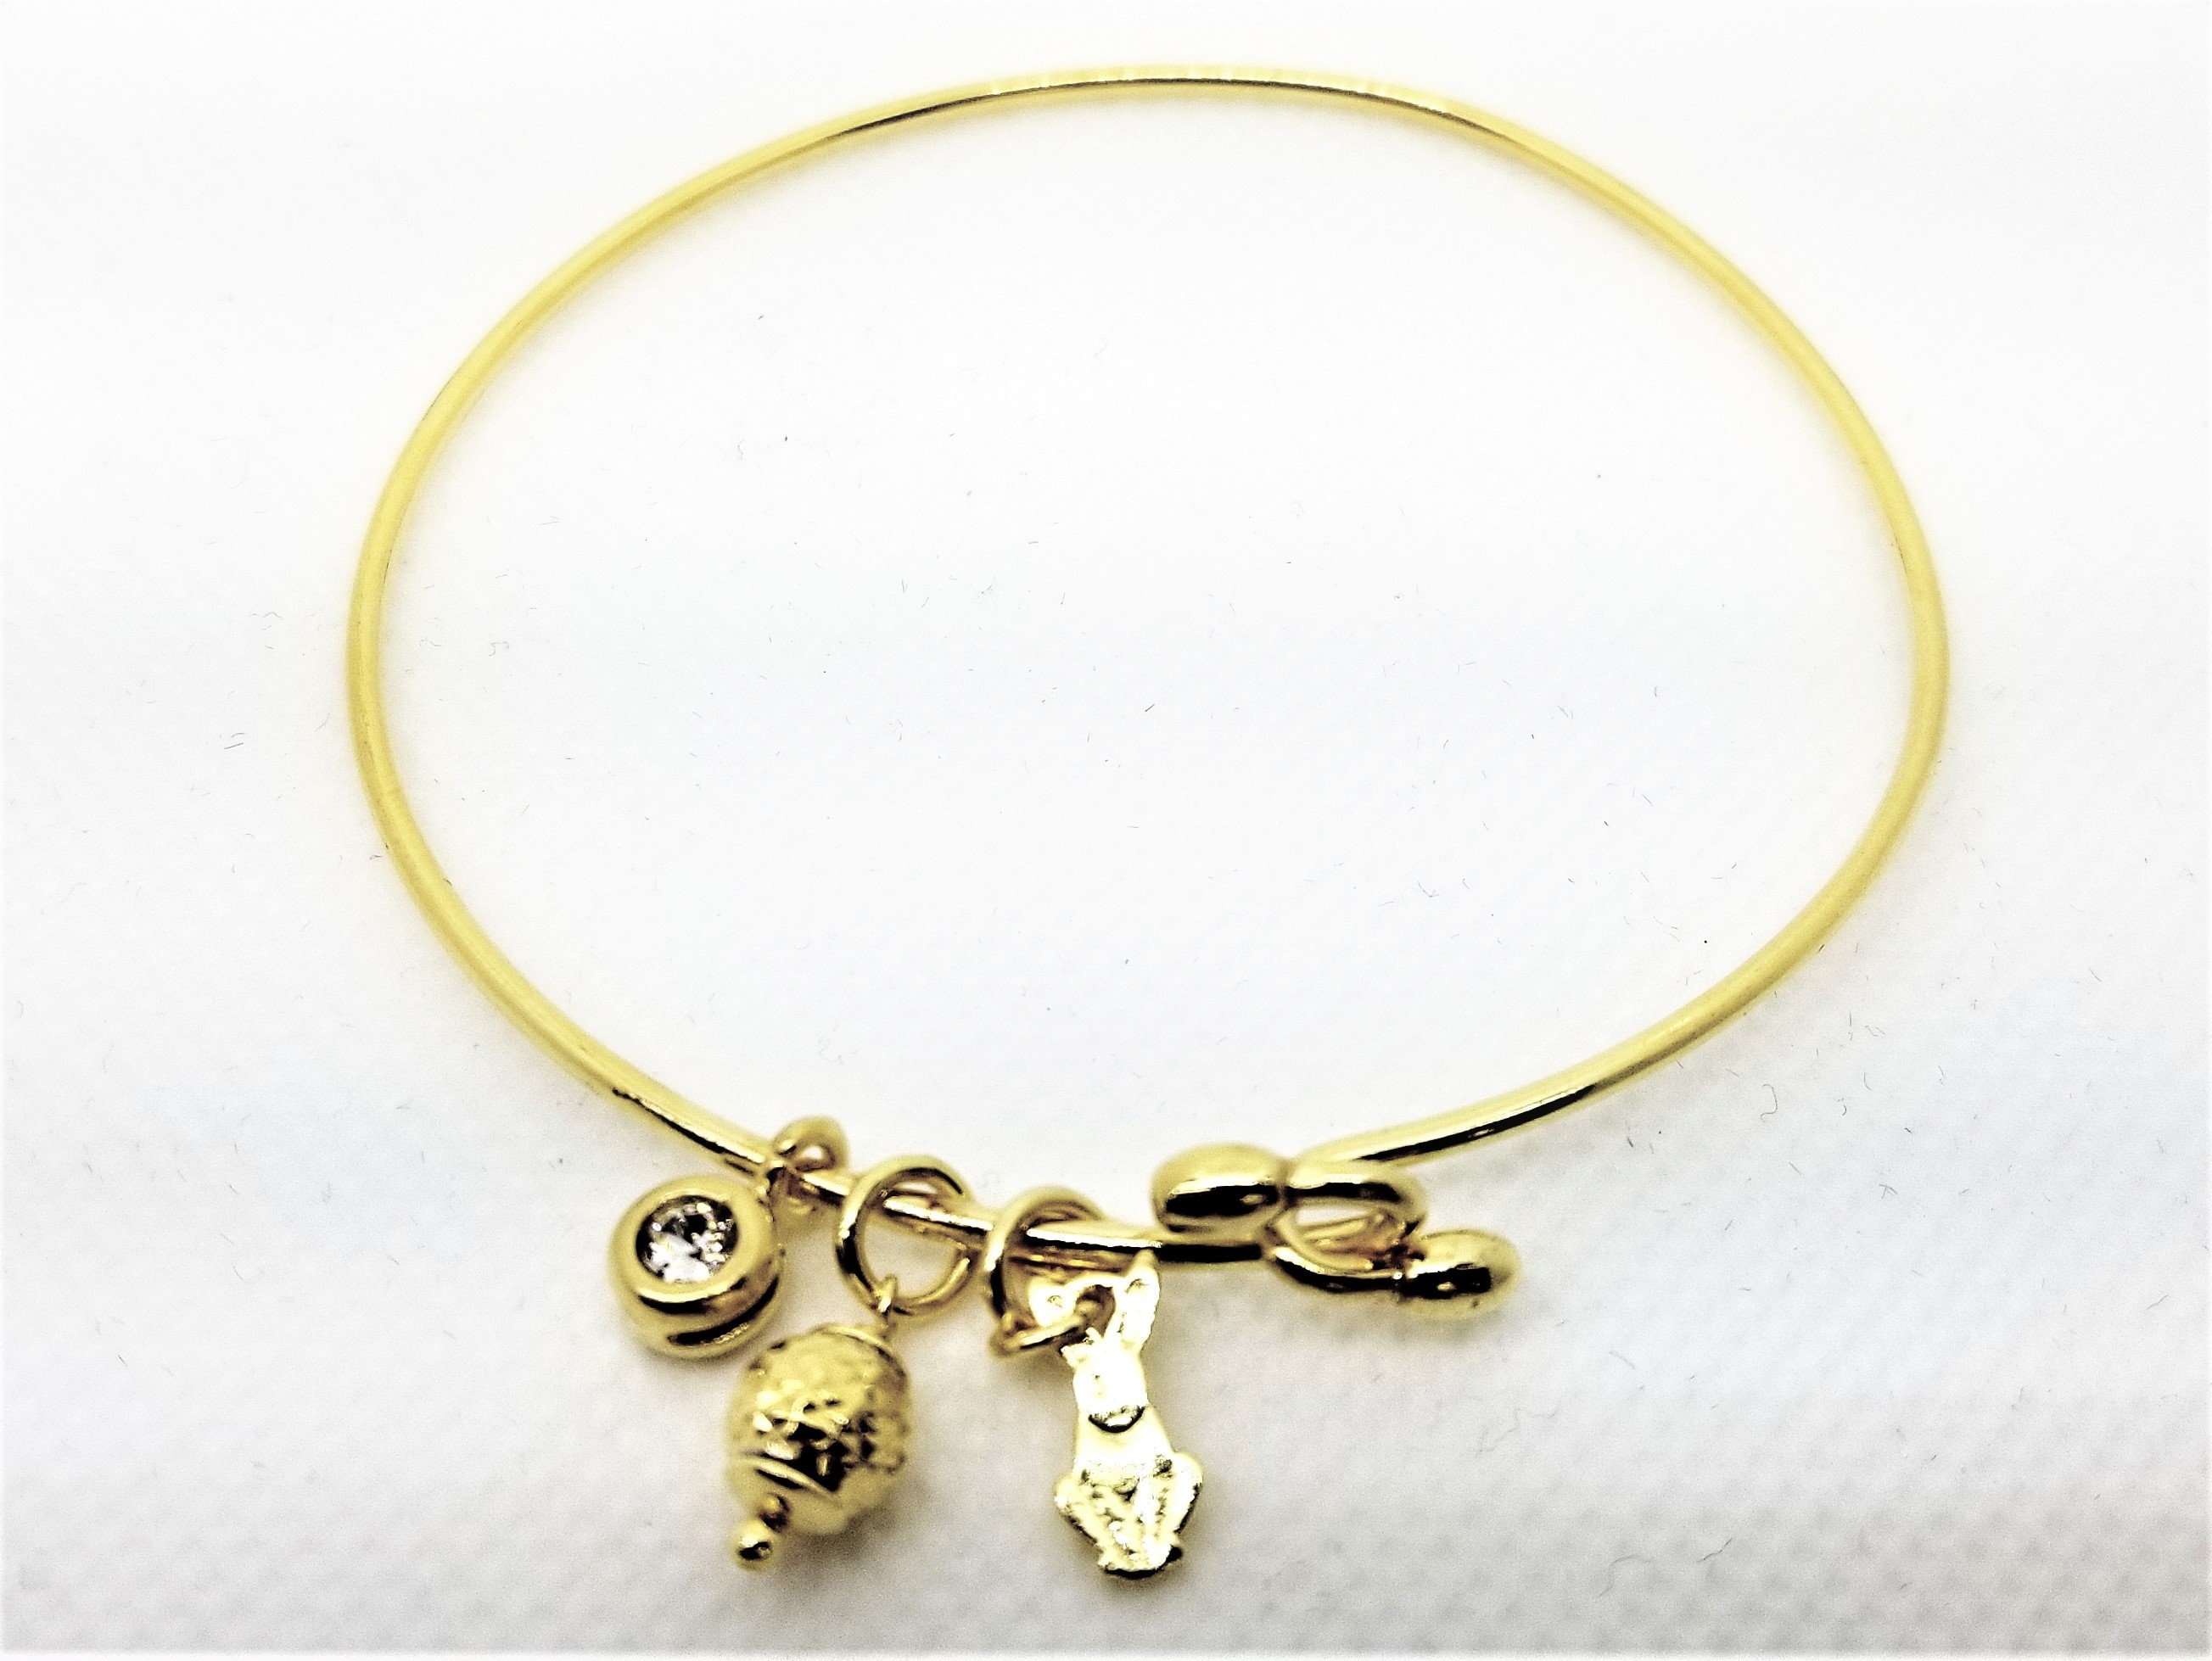  925 Sterling Silver Yellow Gold Tone Adjustable Charm Bangle